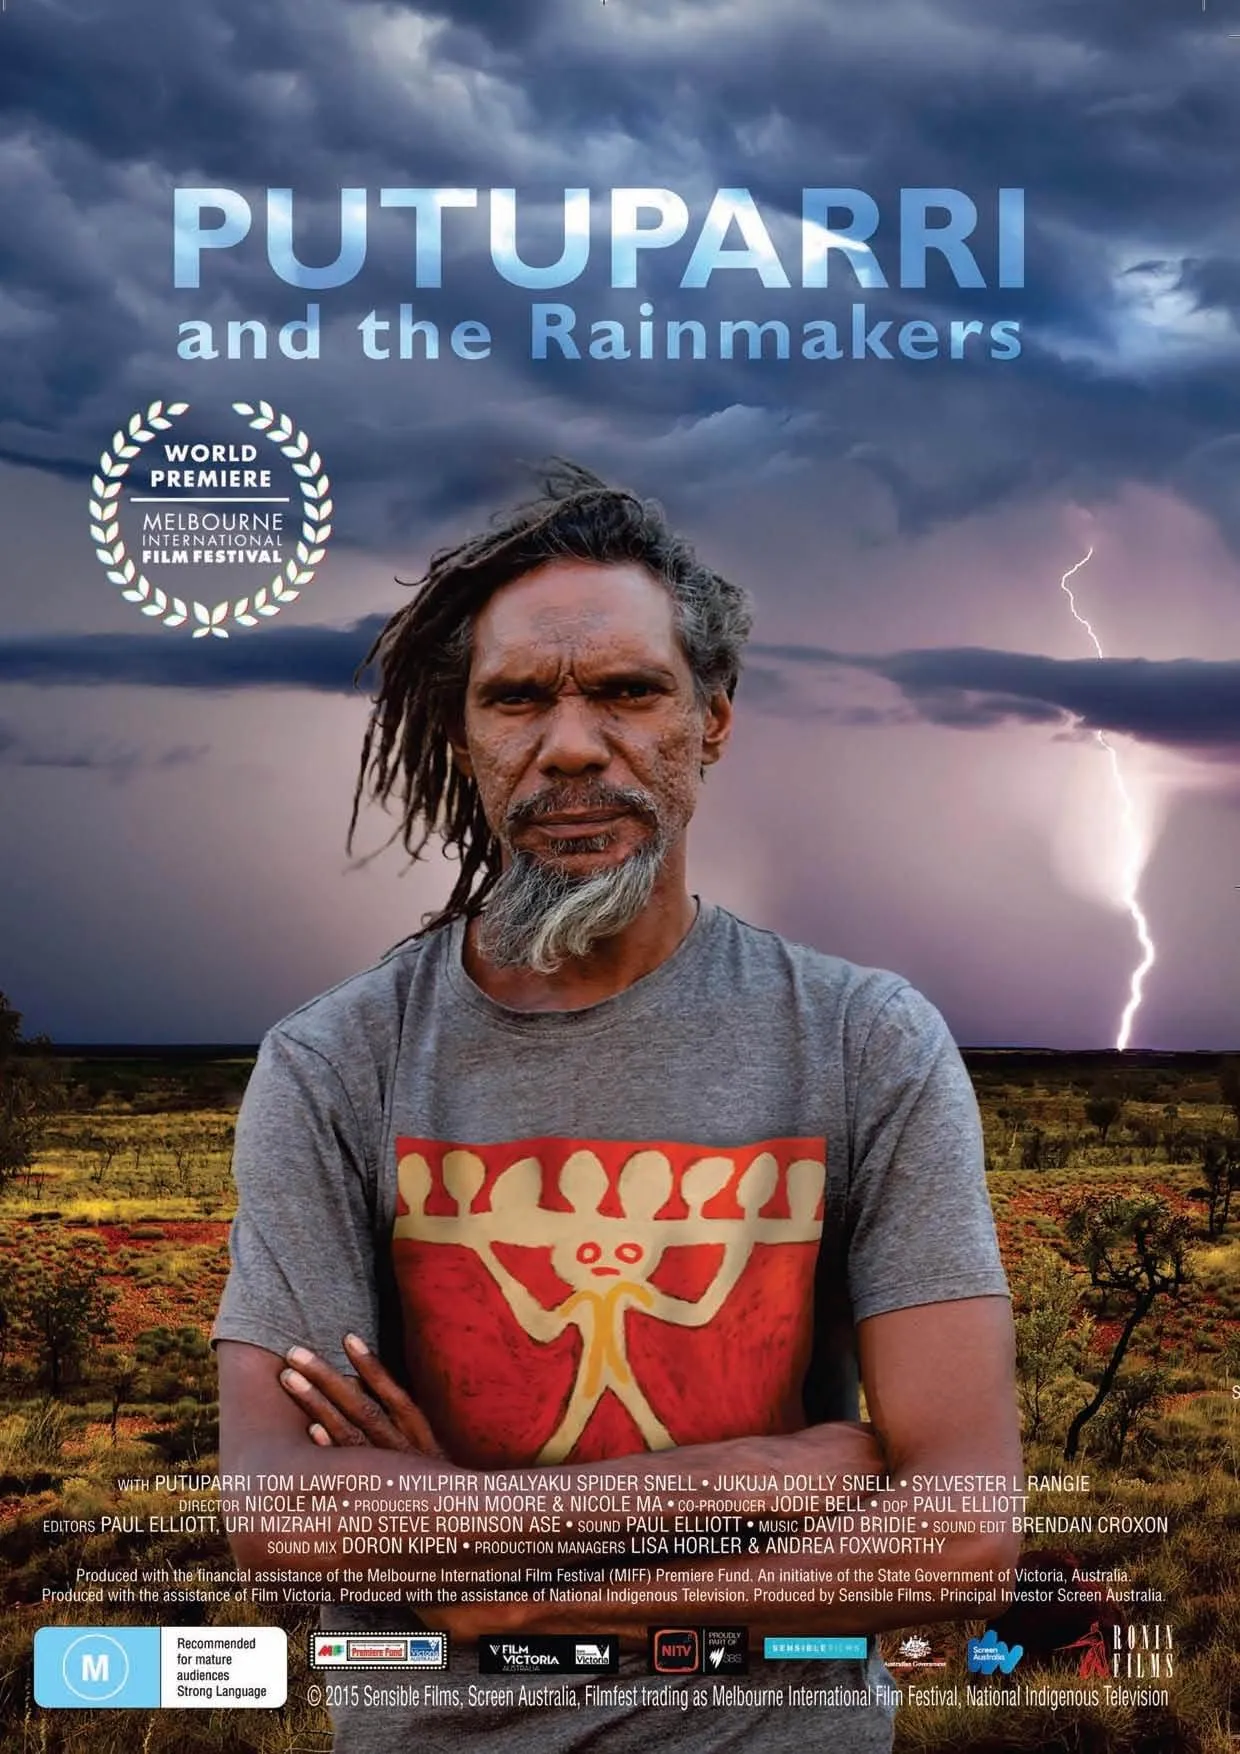     Putuparri and the Rainmakers